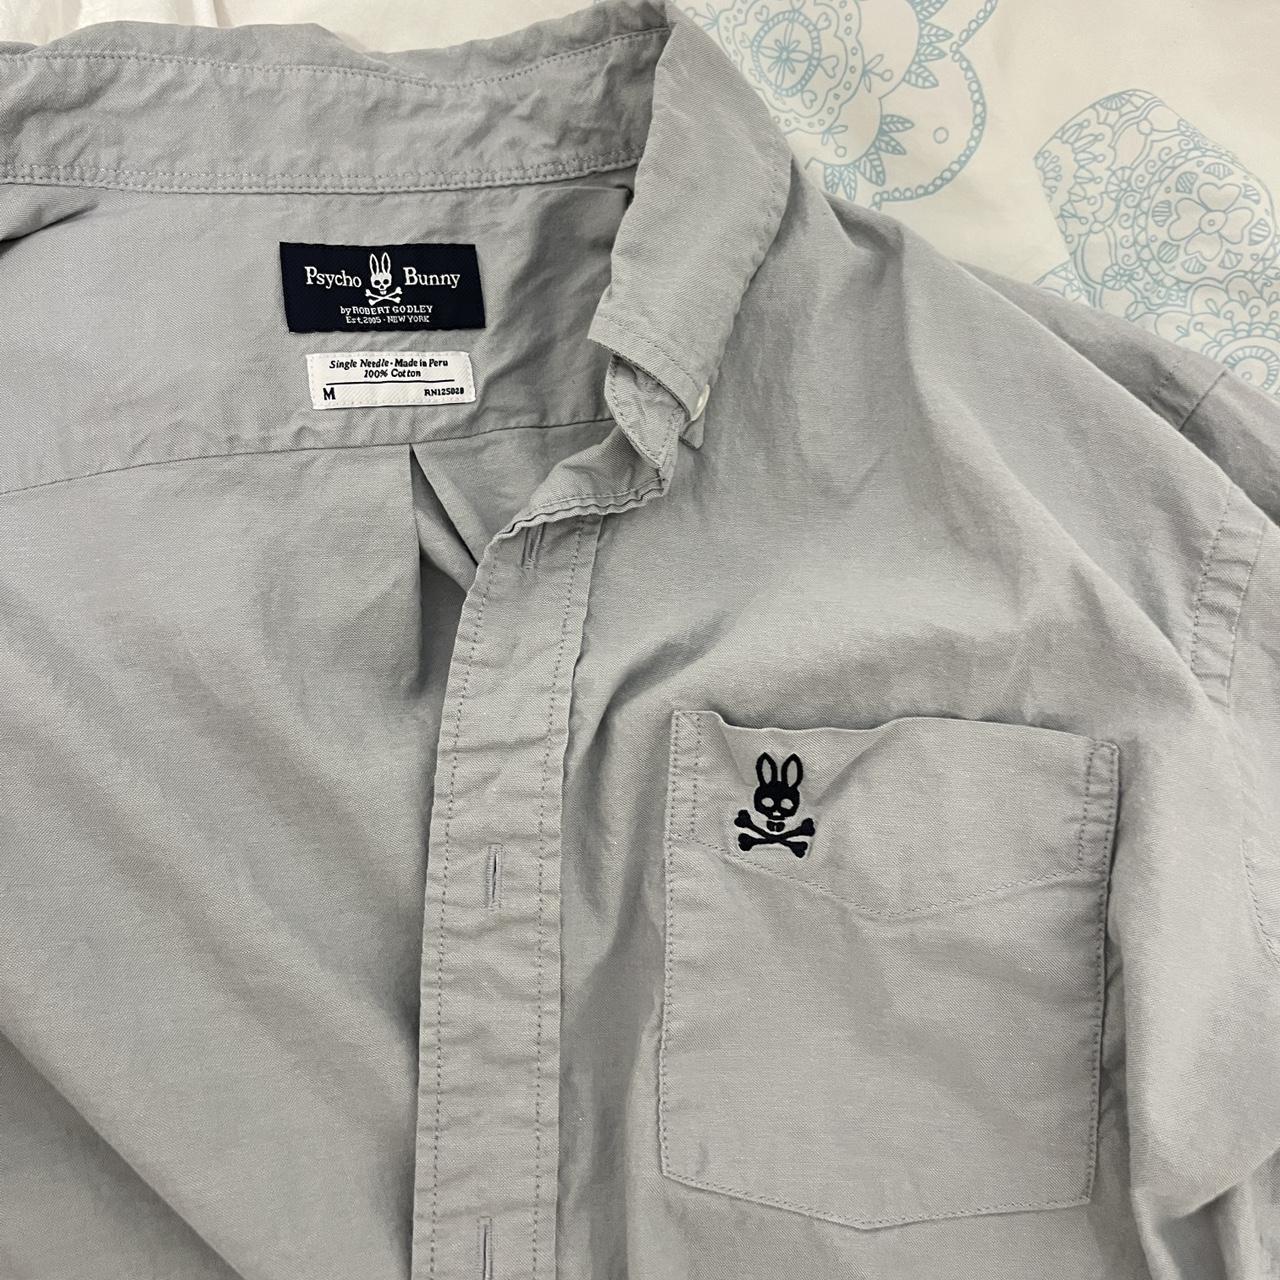 Product Image 4 - Psycho Bunny grey button up

‼️NO